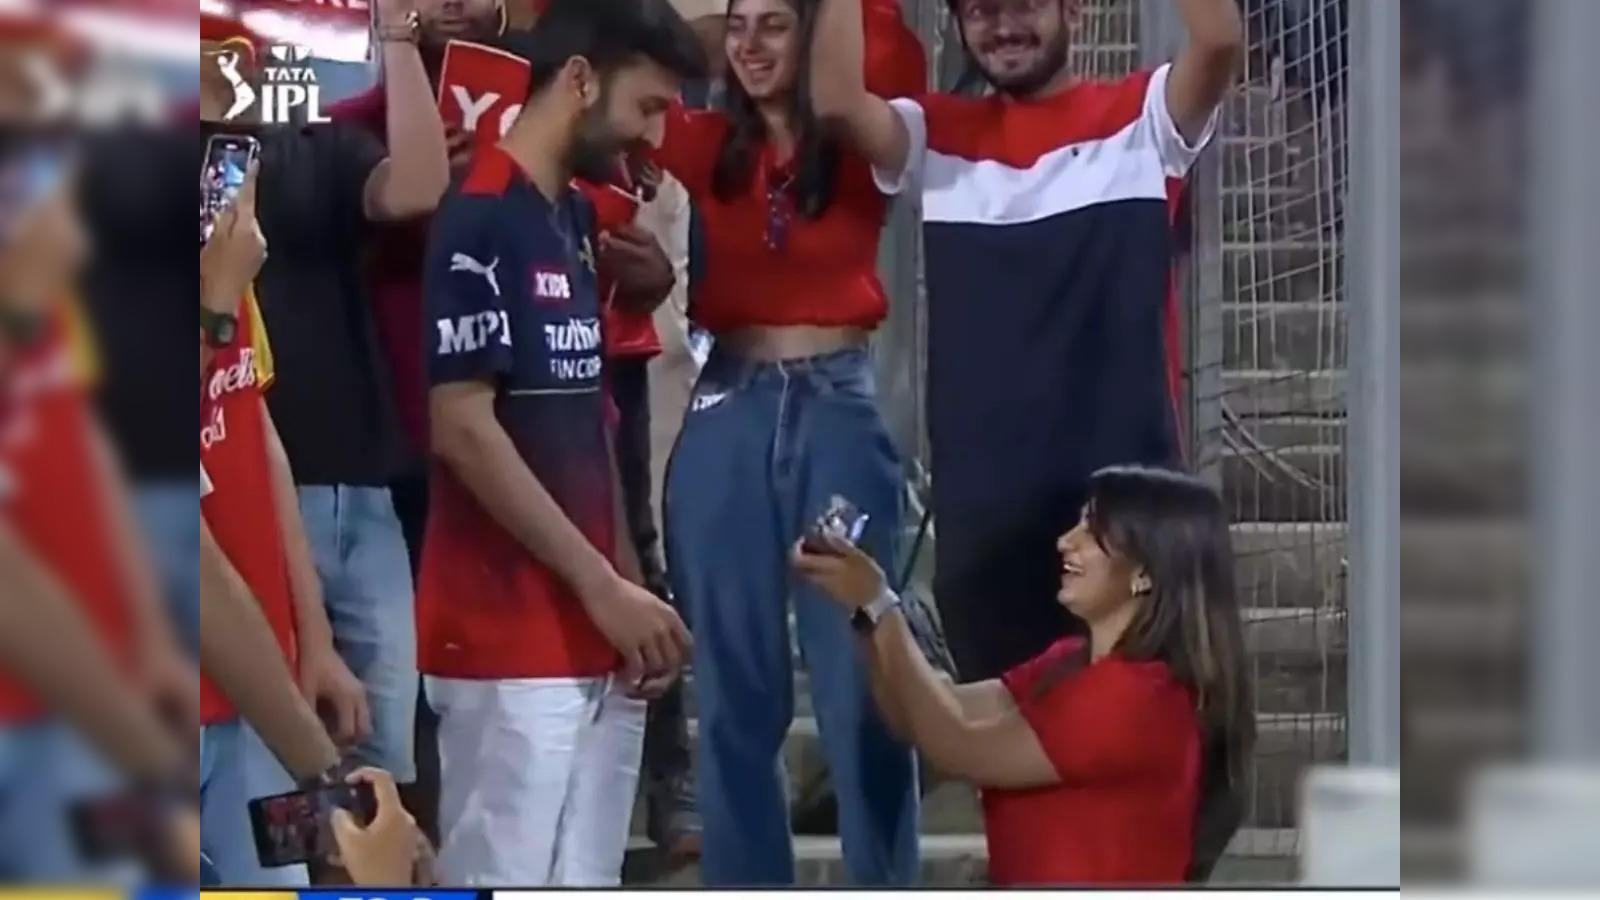 Woman proposes to boyfriend in the stands during RCB-CSK match, Twitter  cheers - The Economic Times